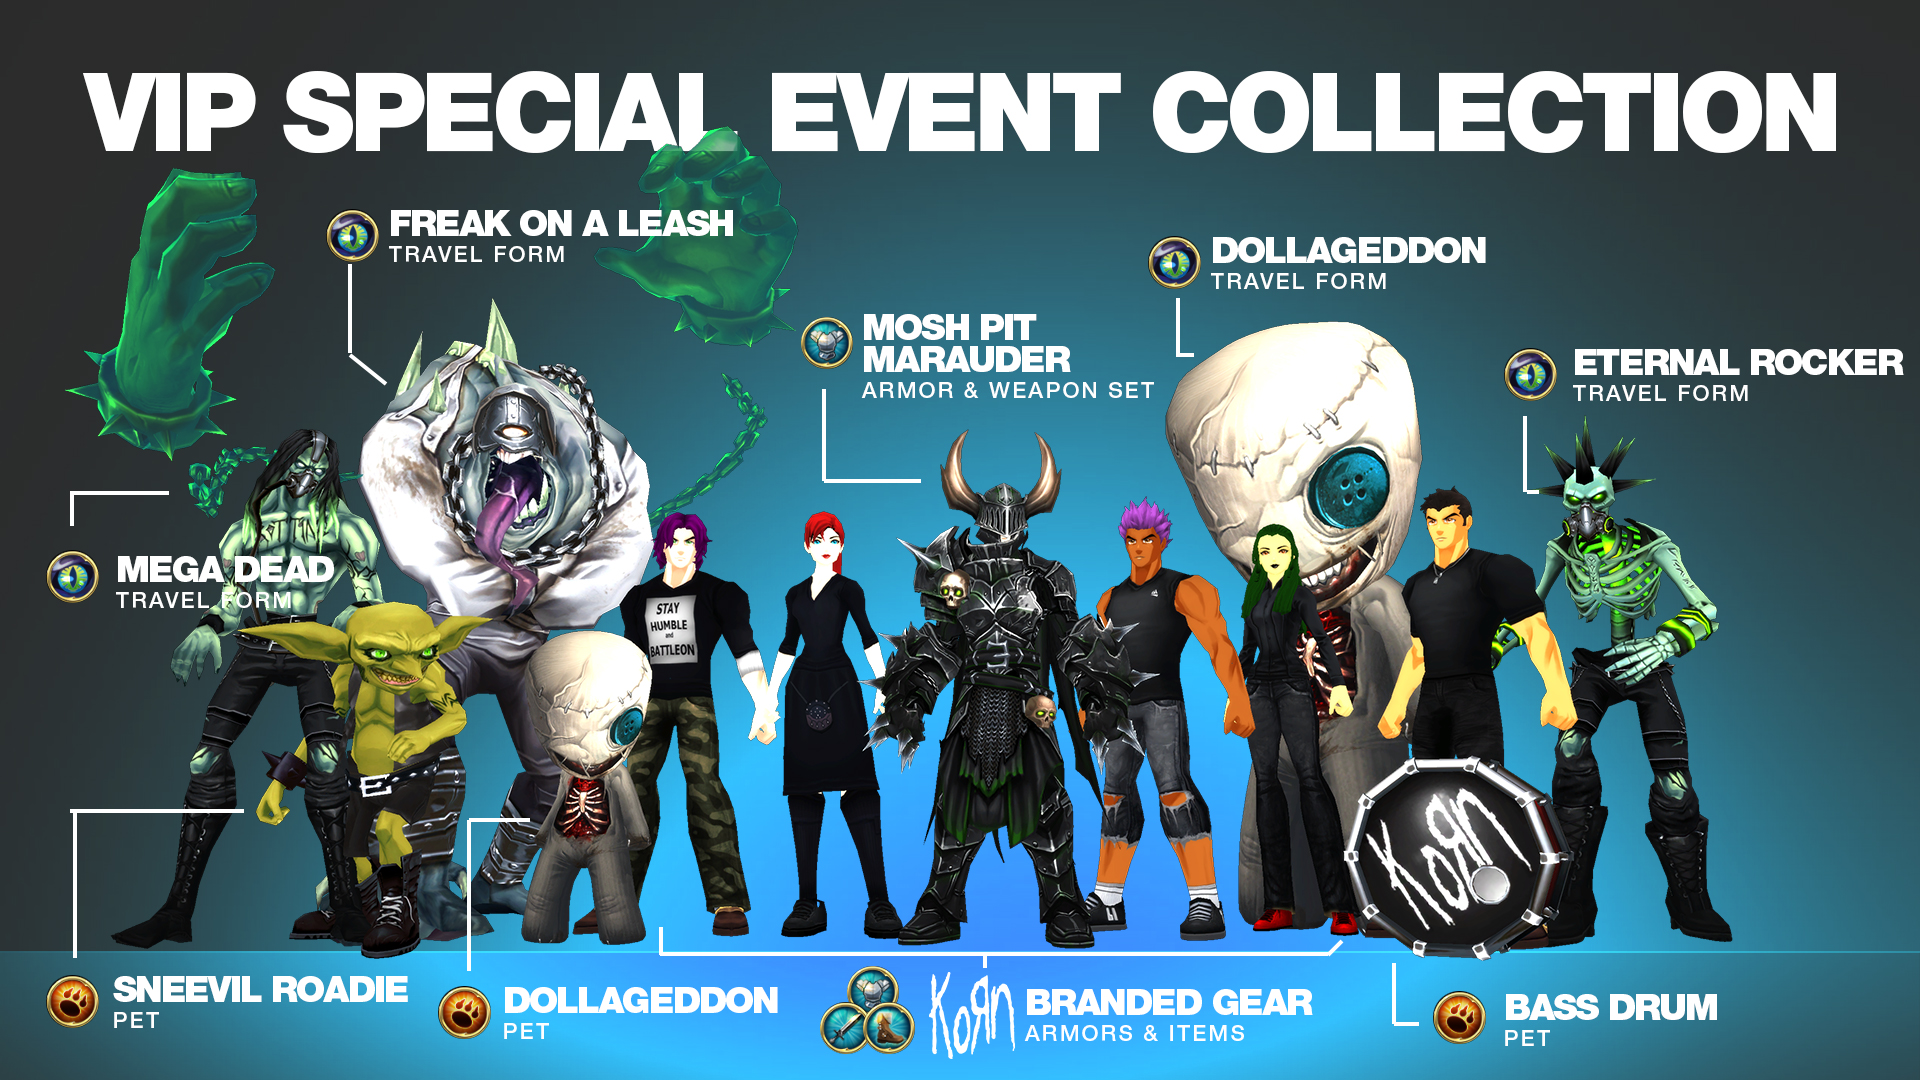 VIP Special Event Collection